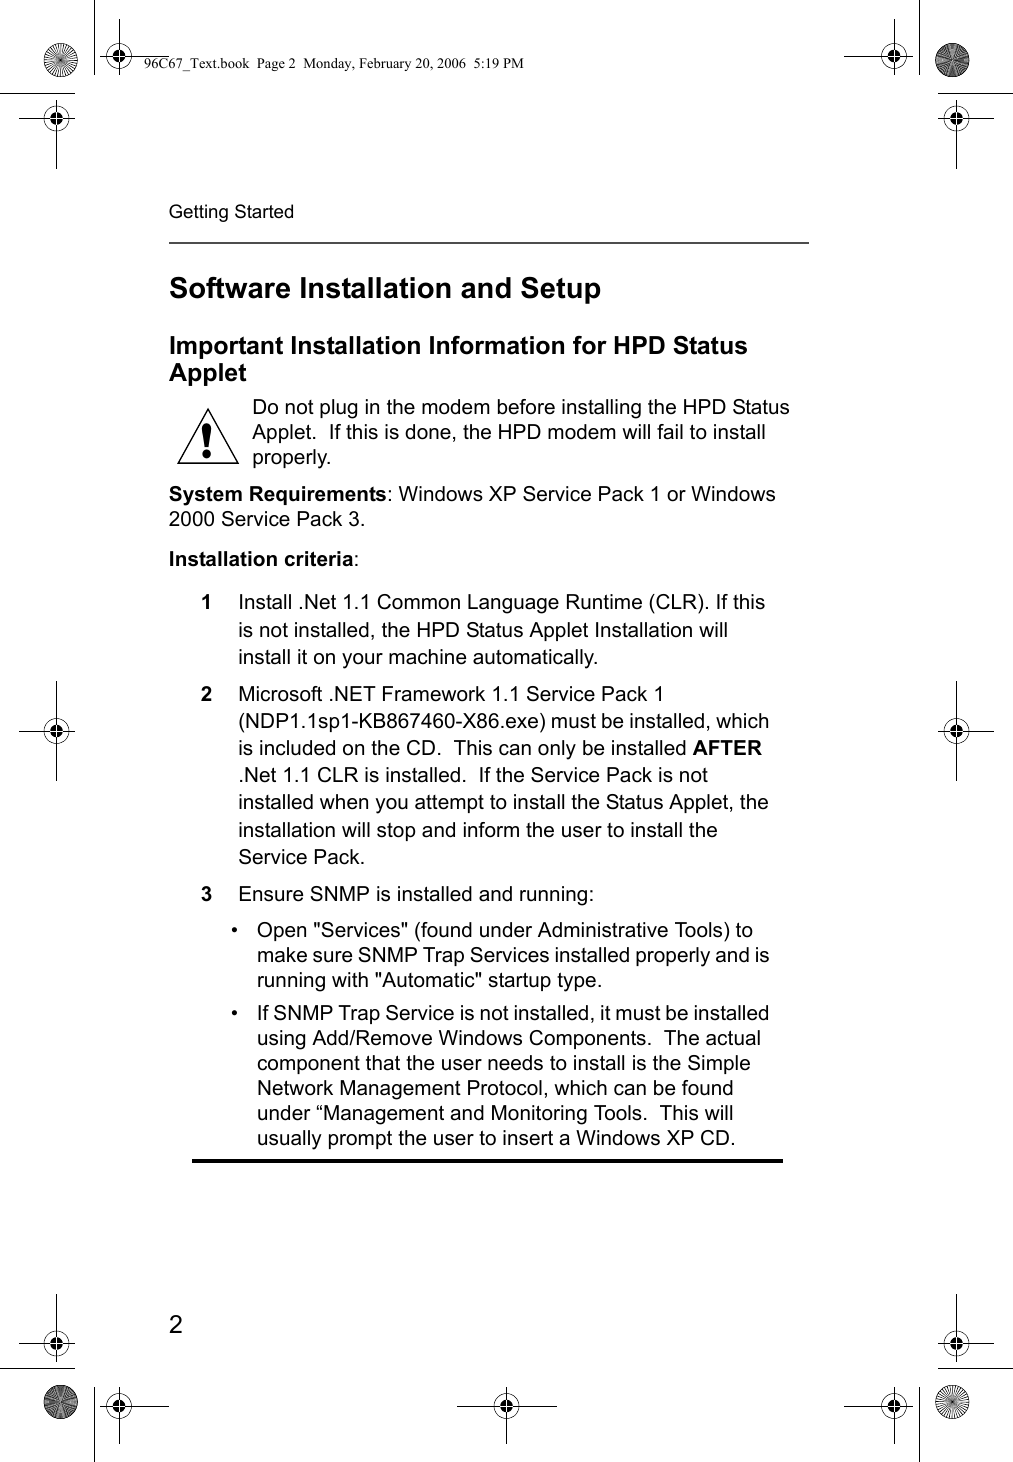 2Getting StartedSoftware Installation and SetupImportant Installation Information for HPD Status AppletDo not plug in the modem before installing the HPD Status Applet.  If this is done, the HPD modem will fail to install properly.System Requirements: Windows XP Service Pack 1 or Windows 2000 Service Pack 3.Installation criteria:1Install .Net 1.1 Common Language Runtime (CLR). If this is not installed, the HPD Status Applet Installation will install it on your machine automatically.2Microsoft .NET Framework 1.1 Service Pack 1 (NDP1.1sp1-KB867460-X86.exe) must be installed, which is included on the CD.  This can only be installed AFTER .Net 1.1 CLR is installed.  If the Service Pack is not installed when you attempt to install the Status Applet, the installation will stop and inform the user to install the Service Pack.3Ensure SNMP is installed and running:• Open &quot;Services&quot; (found under Administrative Tools) to make sure SNMP Trap Services installed properly and is running with &quot;Automatic&quot; startup type.• If SNMP Trap Service is not installed, it must be installed using Add/Remove Windows Components.  The actual component that the user needs to install is the Simple Network Management Protocol, which can be found under “Management and Monitoring Tools.  This will usually prompt the user to insert a Windows XP CD.!96C67_Text.book  Page 2  Monday, February 20, 2006  5:19 PM